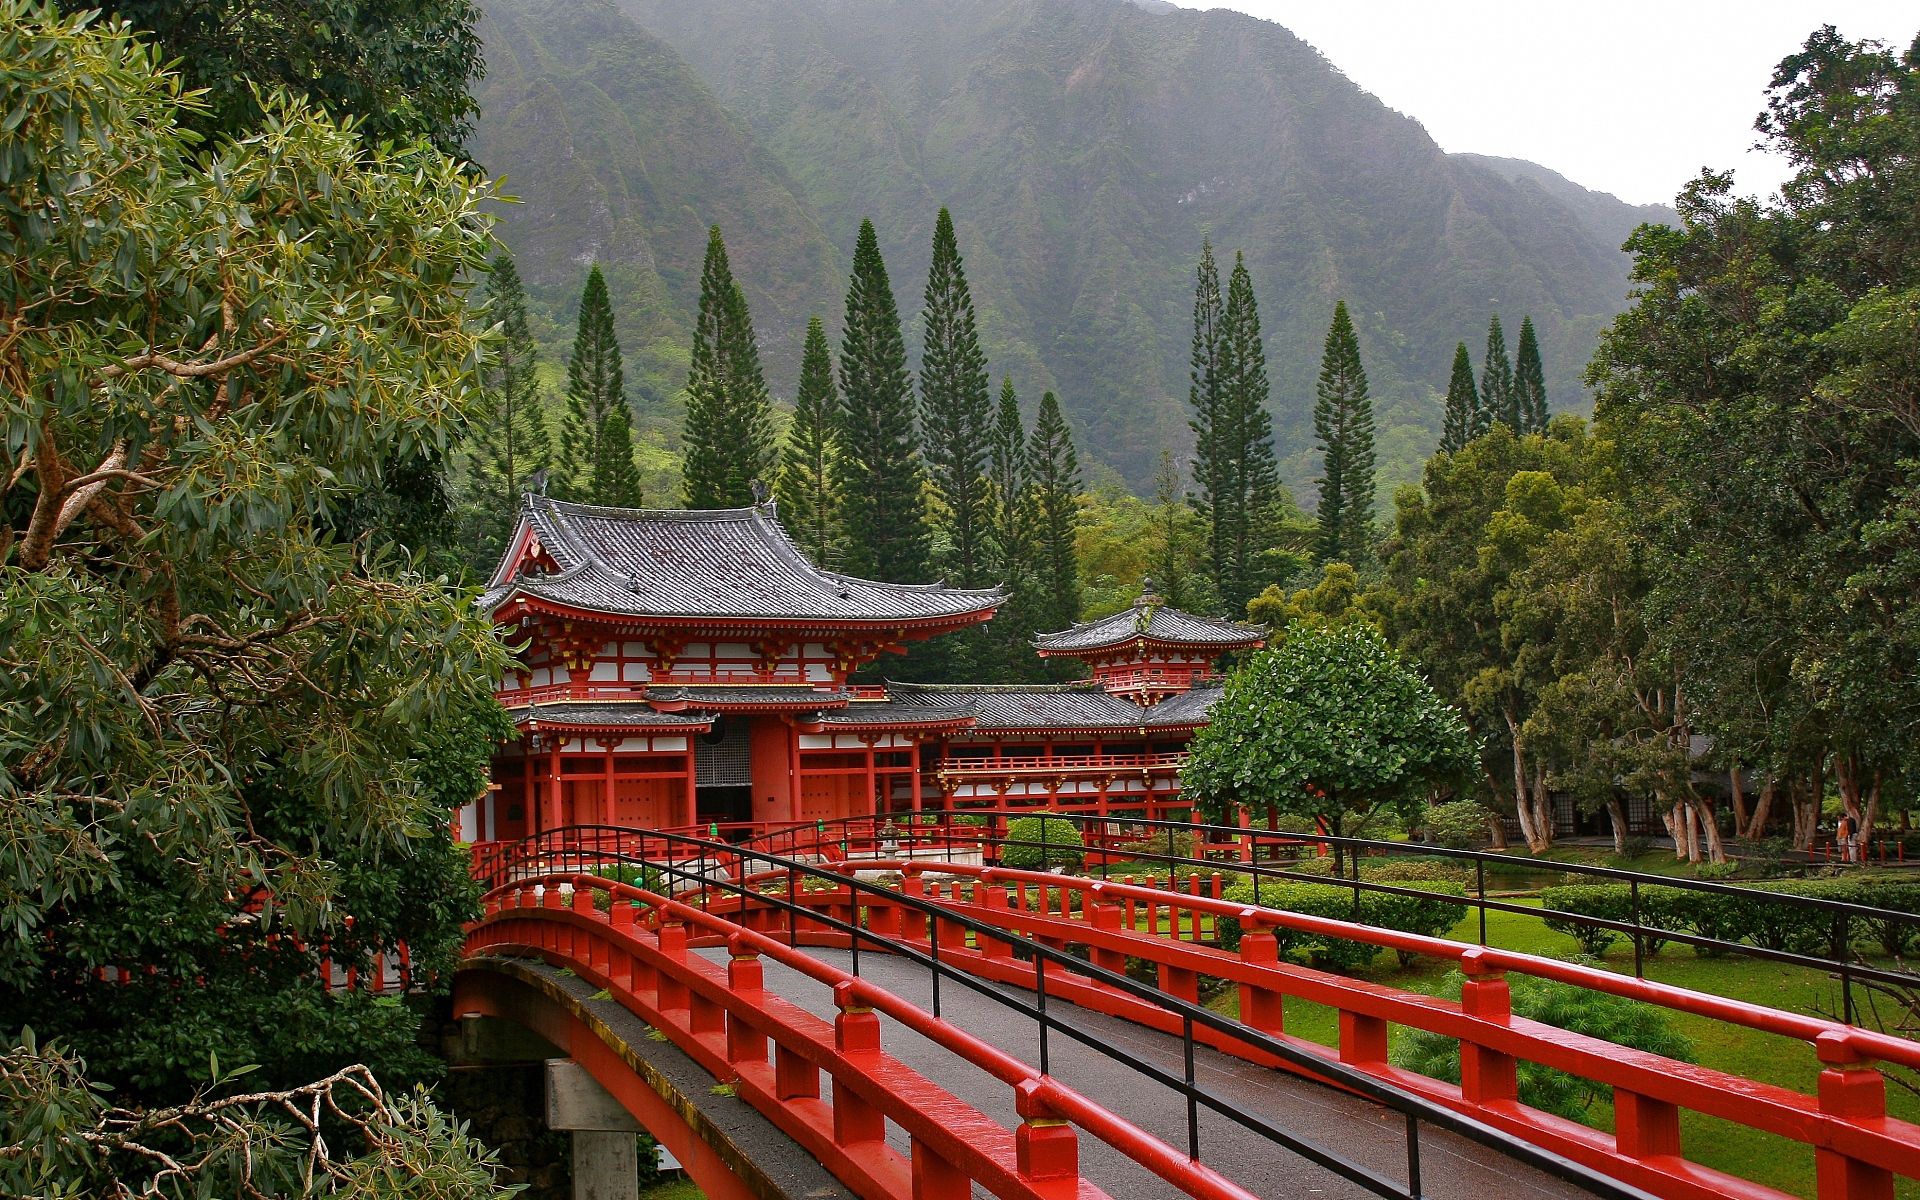 japan, nature, trees, mountains, architecture, red, bridge